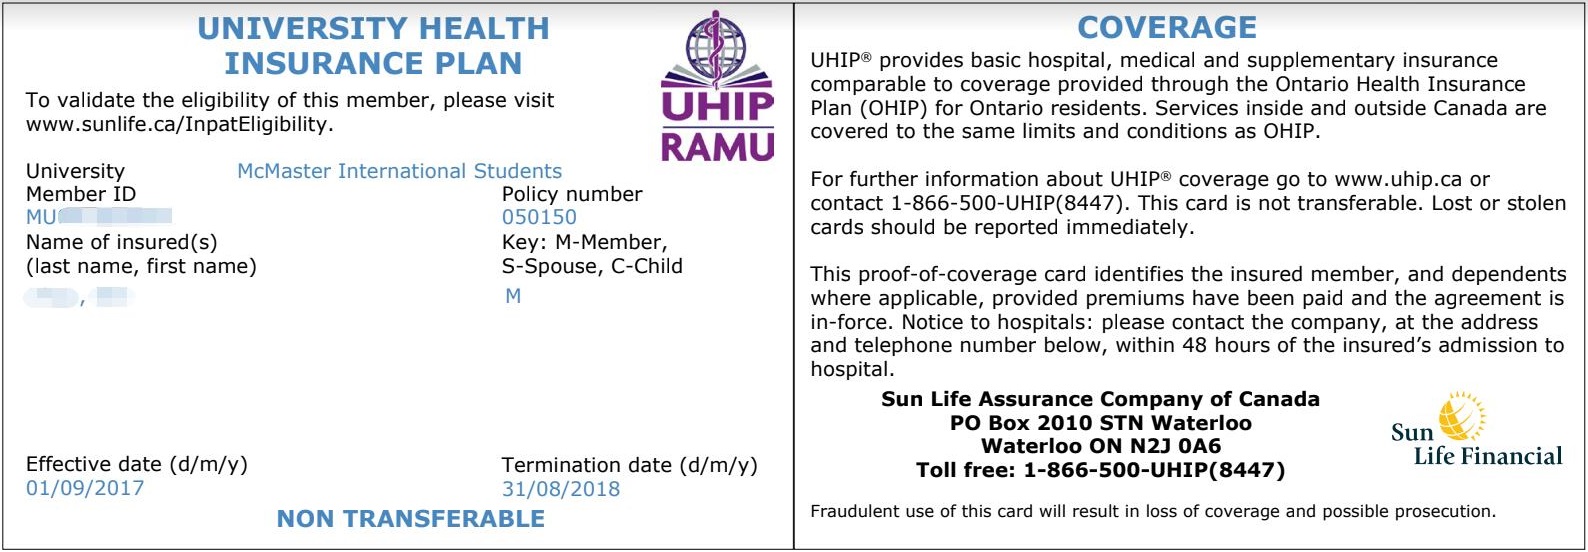 _images/UHIP_coverage_card.jpg